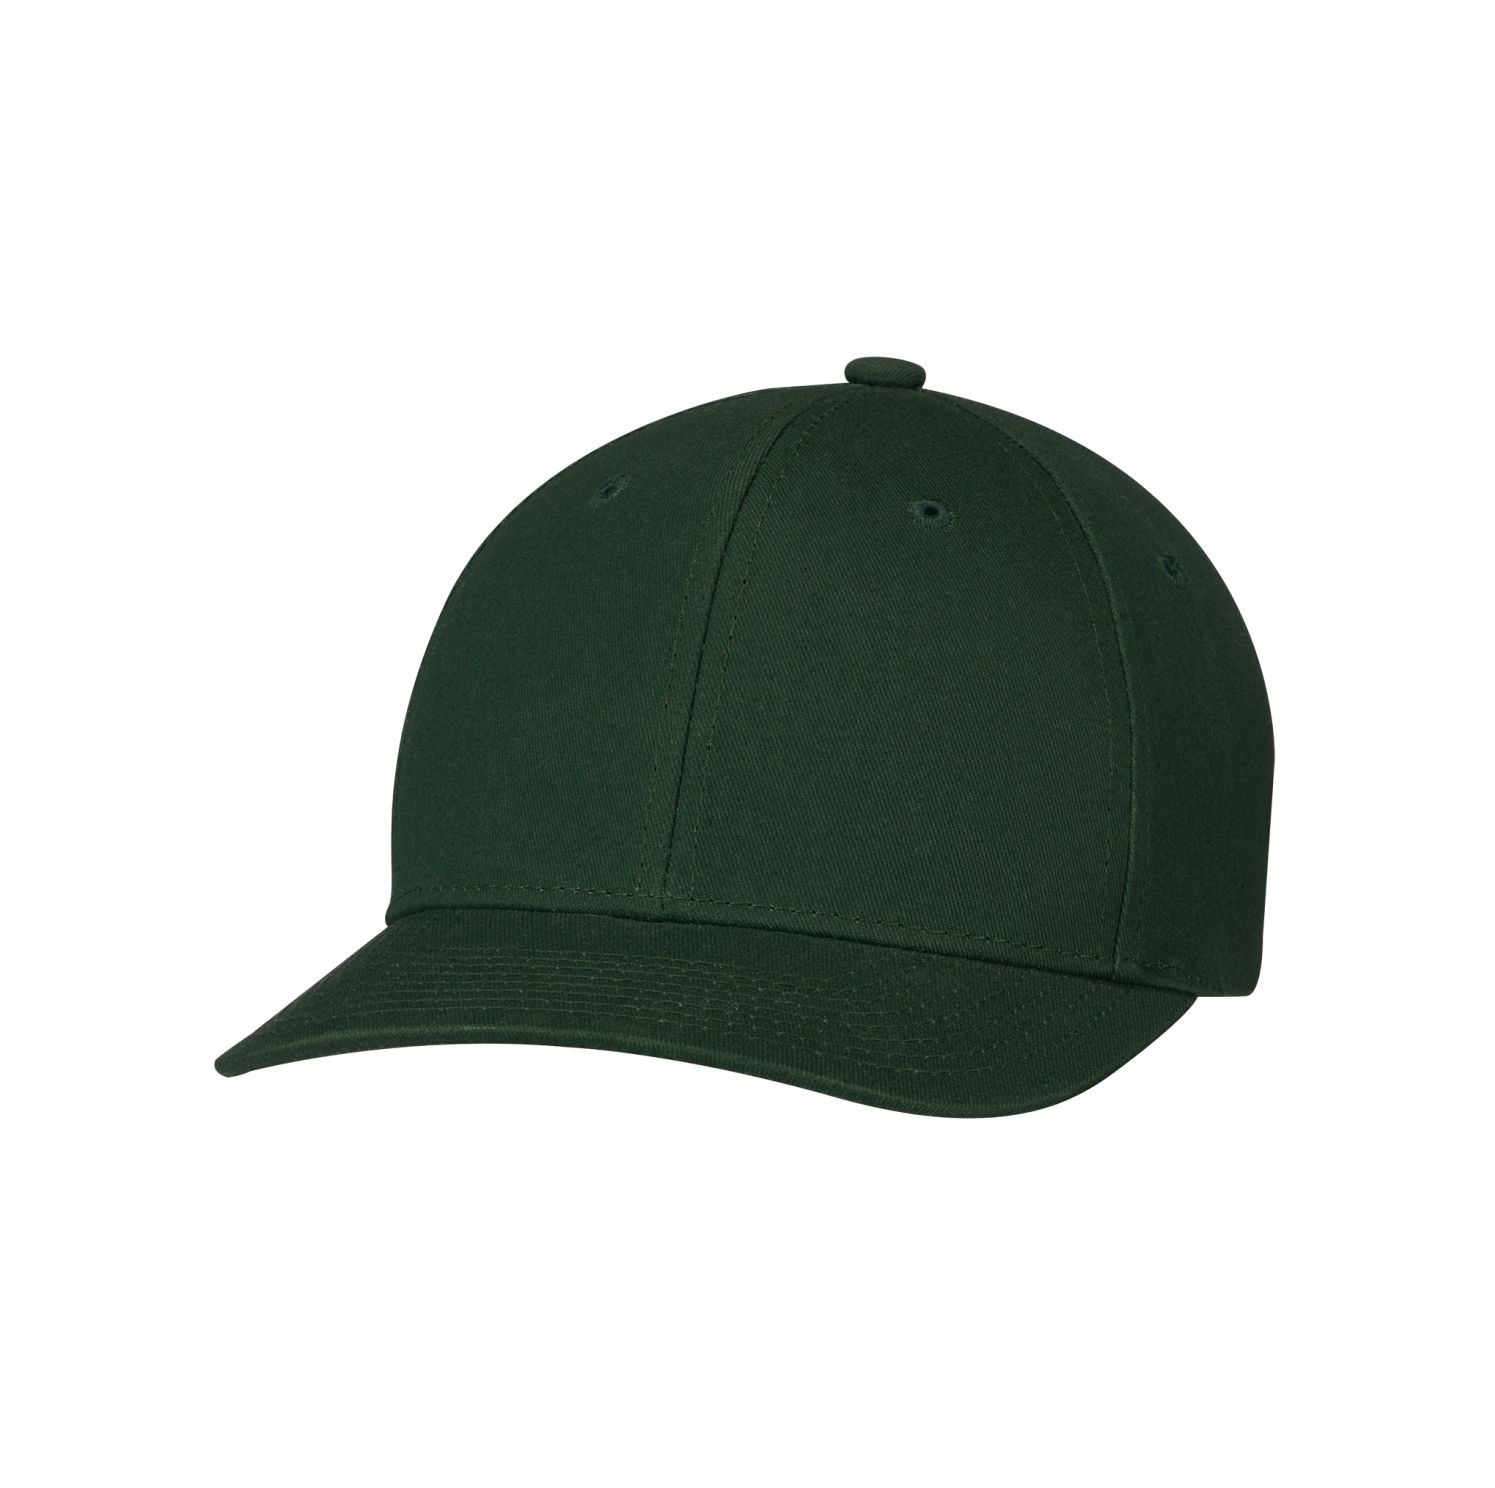 AJM 6-Panel Constructed Pro-Round Hat #8F010M Black Forest